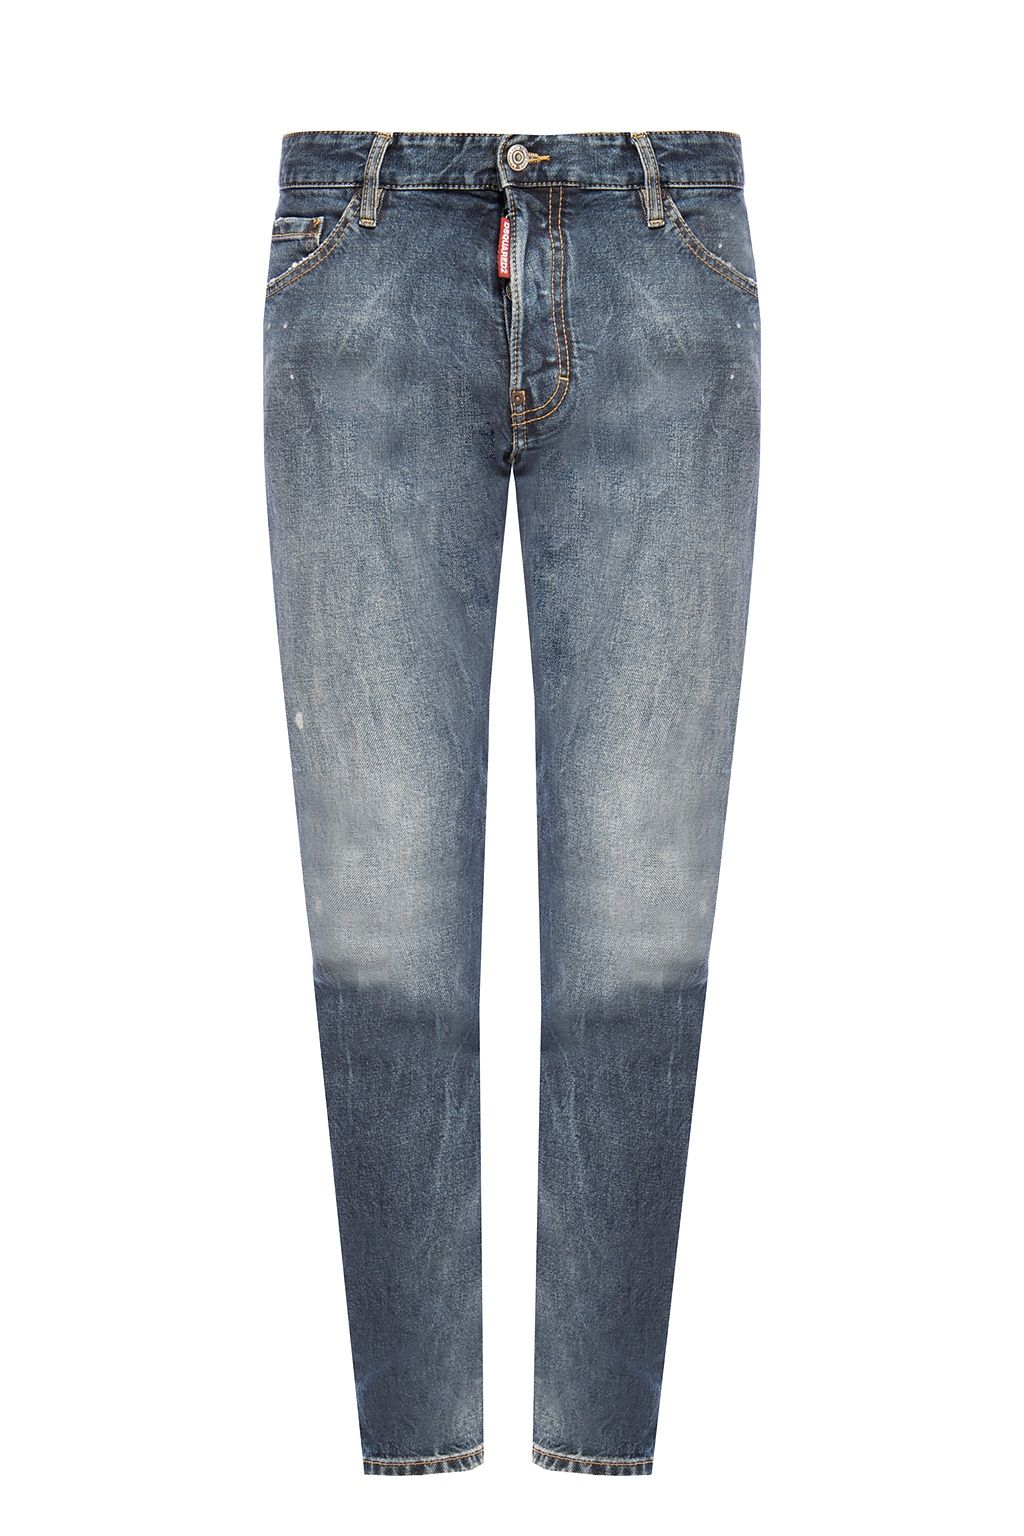 Dsquared² Men's 'Cool Guy' Blue Cotton Distressed Jeans - Designed by Dsquared² Available to Buy at a Discounted Price on Moon Behind The Hill Online Designer Discount Store